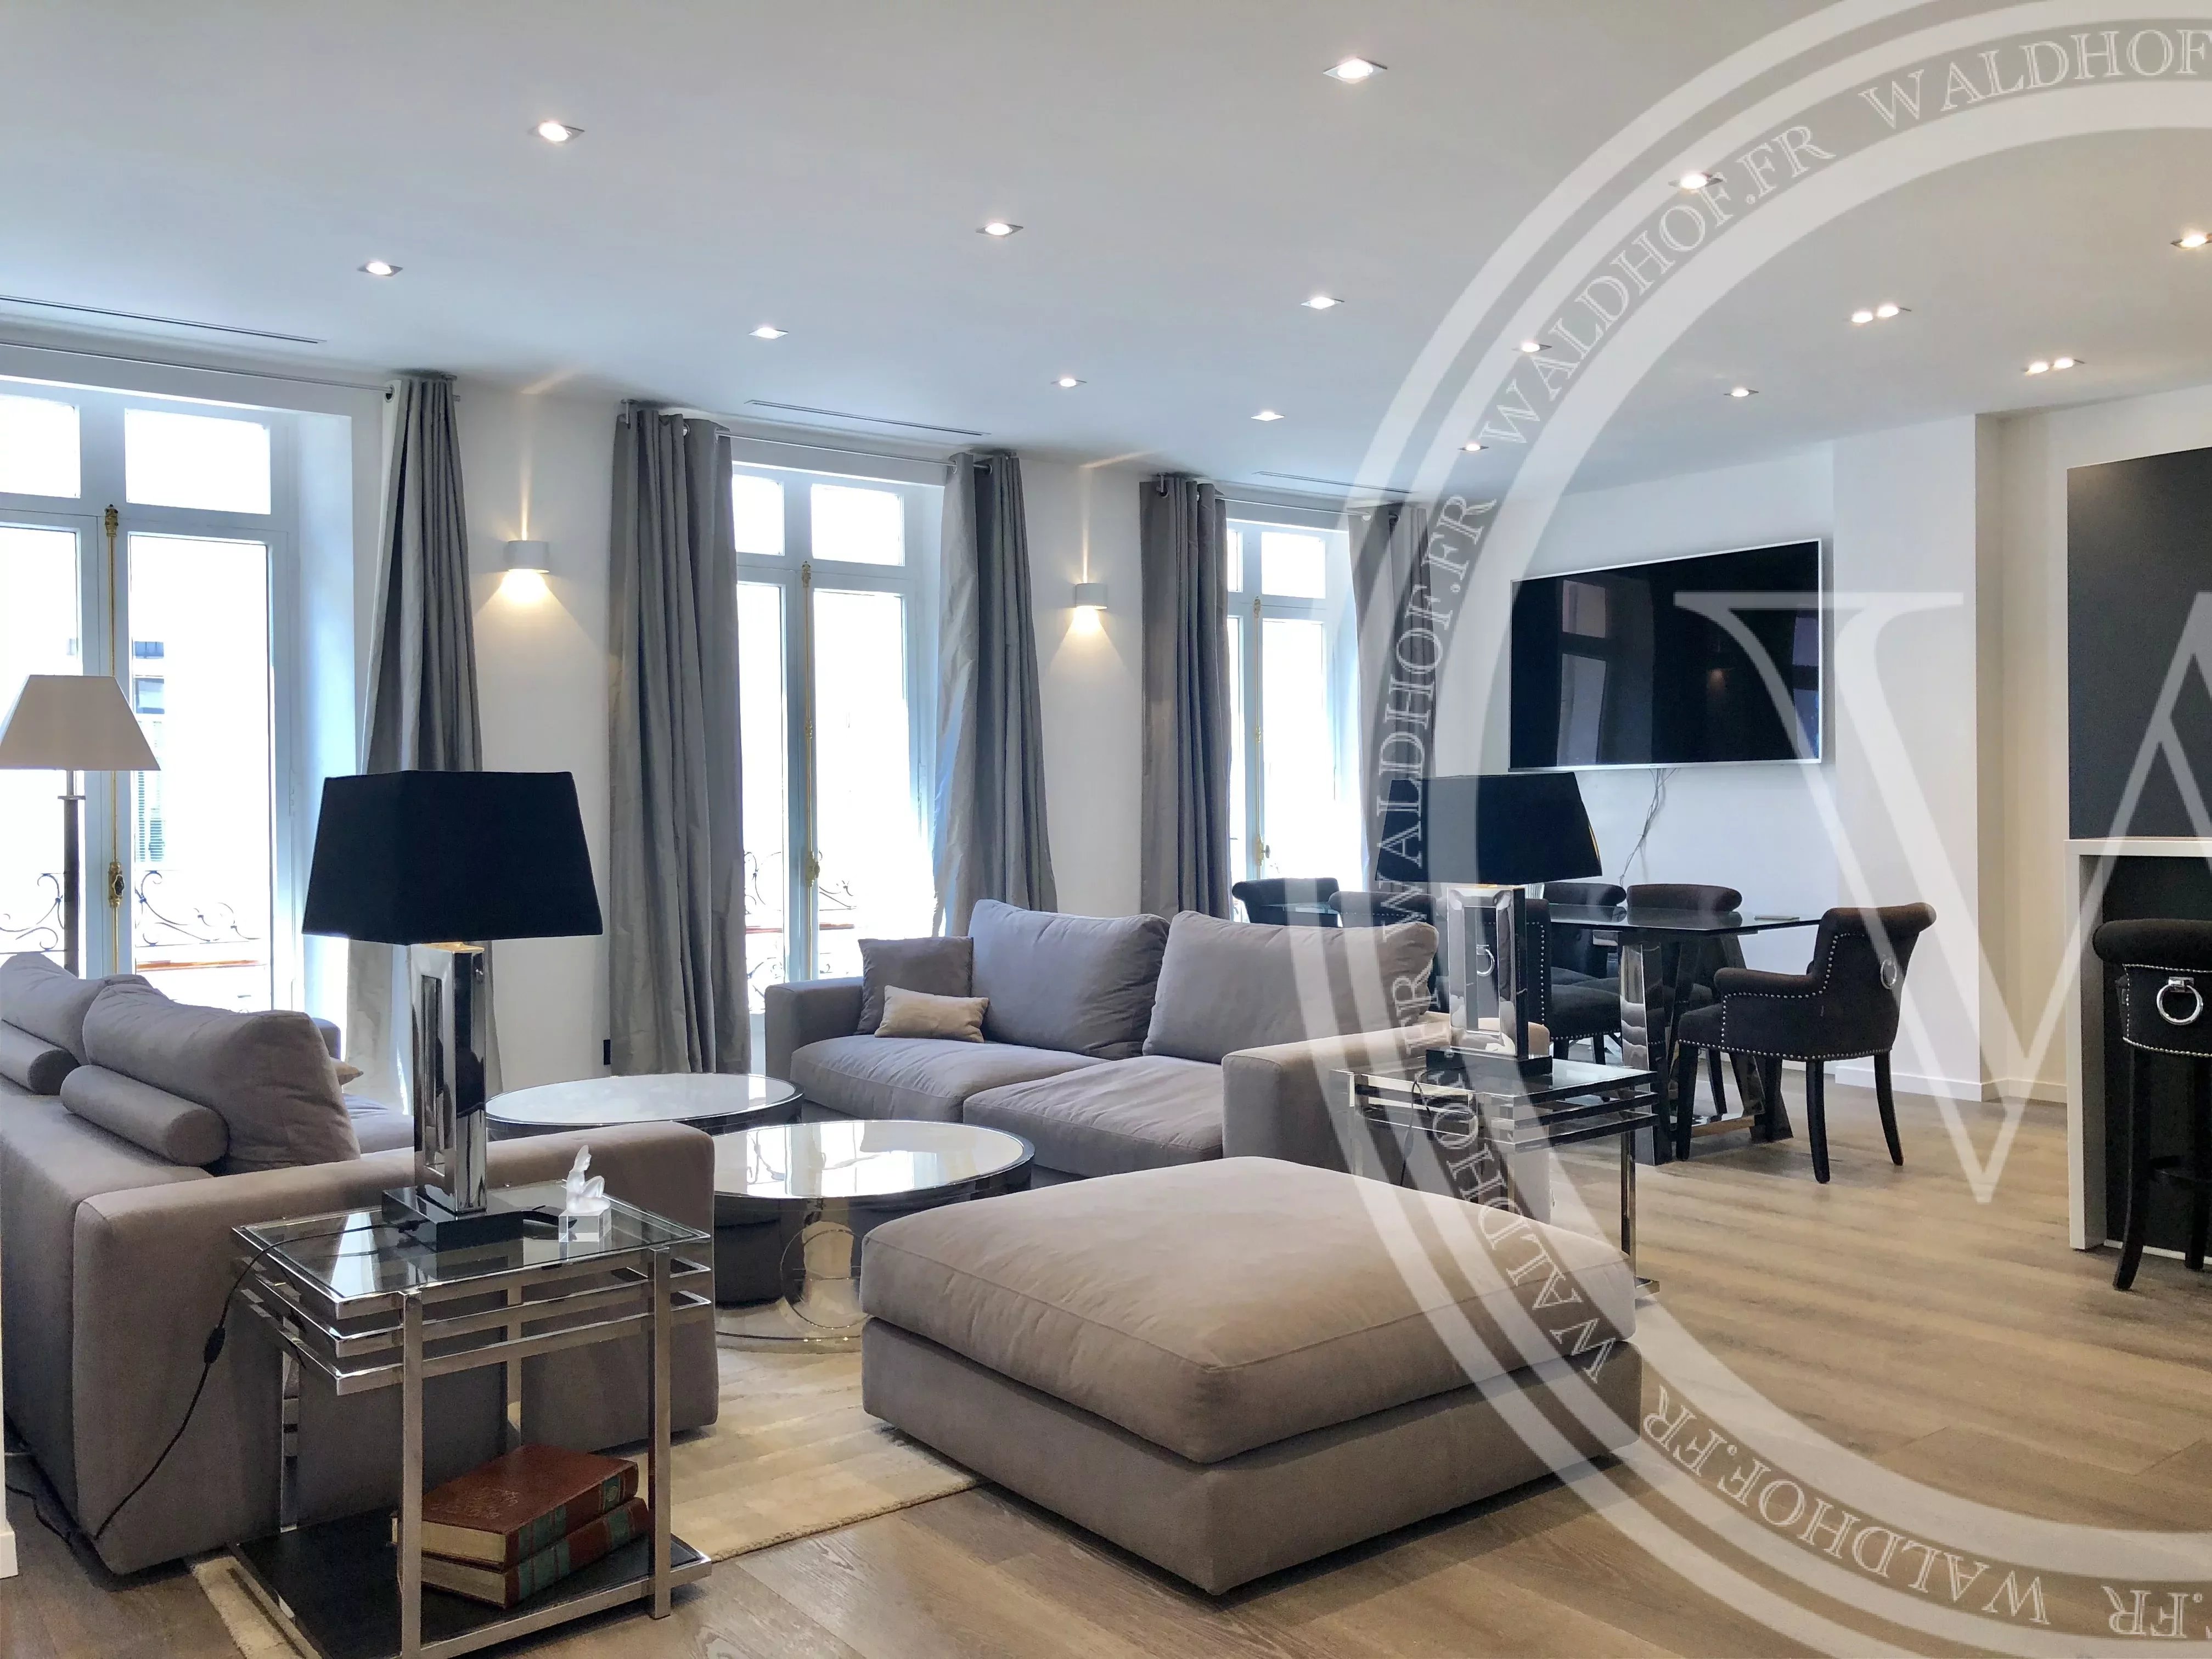 4-bedroom apartment with terrace in downtown Cannes